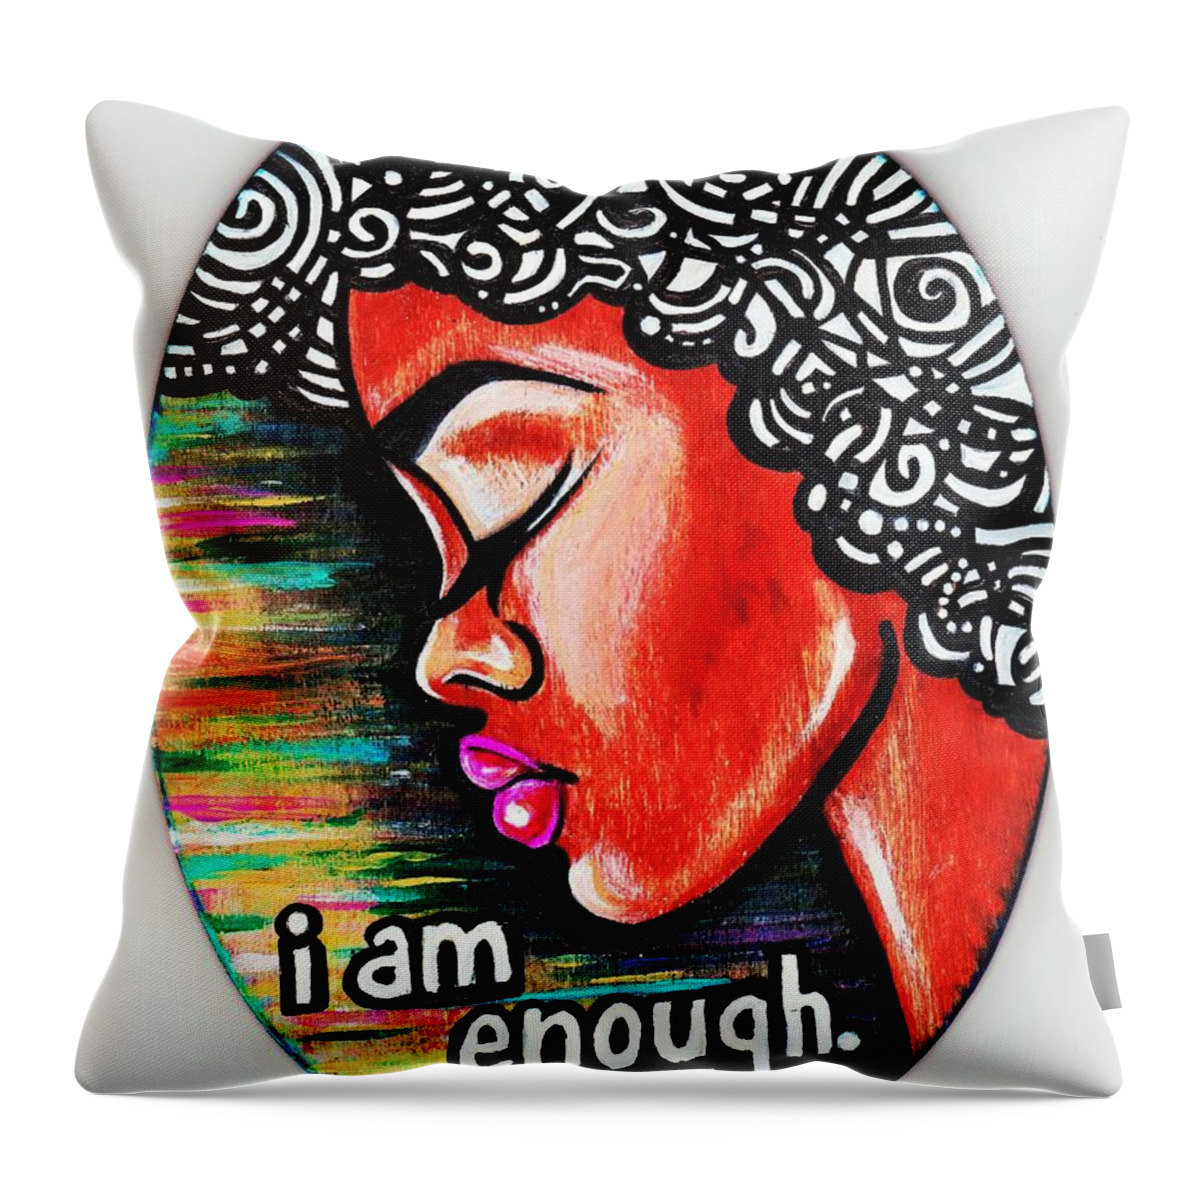 Artbyria Throw Pillow featuring the photograph So She Repeated by Artist RiA